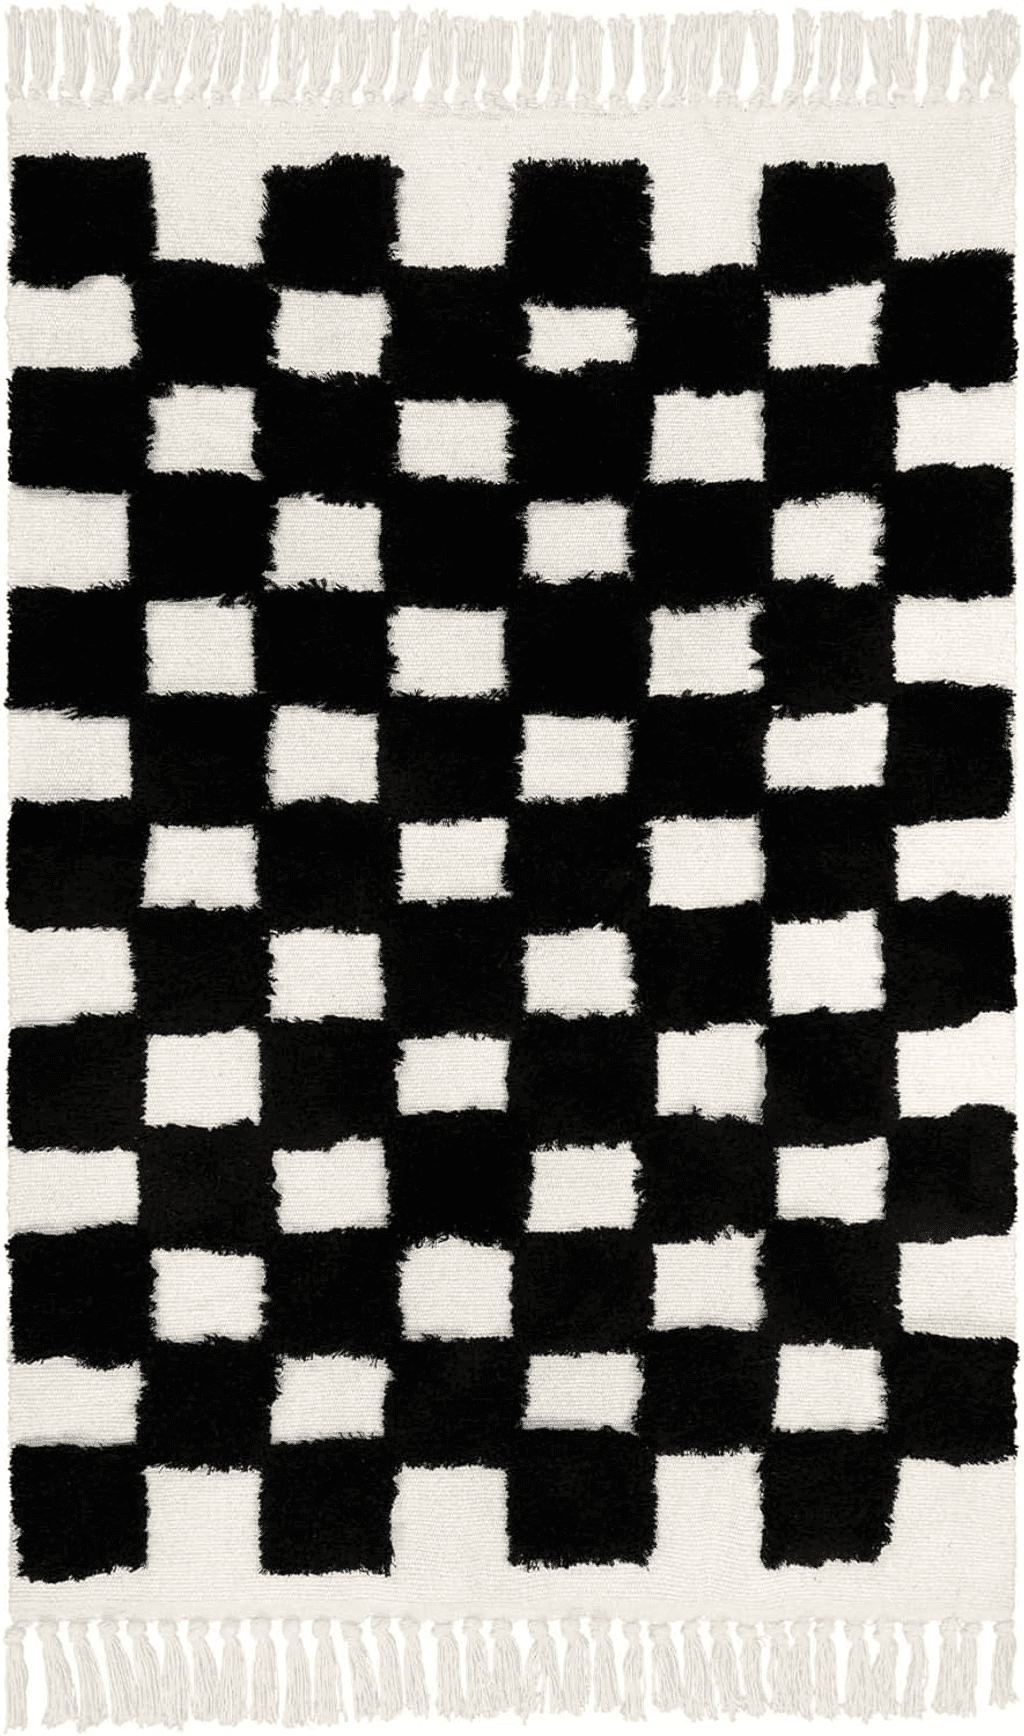 Lahome Checkered Boho Rug for Bedroom, 4x6 Living Room Rug Washable Black and White Area Rug with Tassels, Farmhouse Office Dorm Rug Throw Rugs for Entryways Nursery Decor